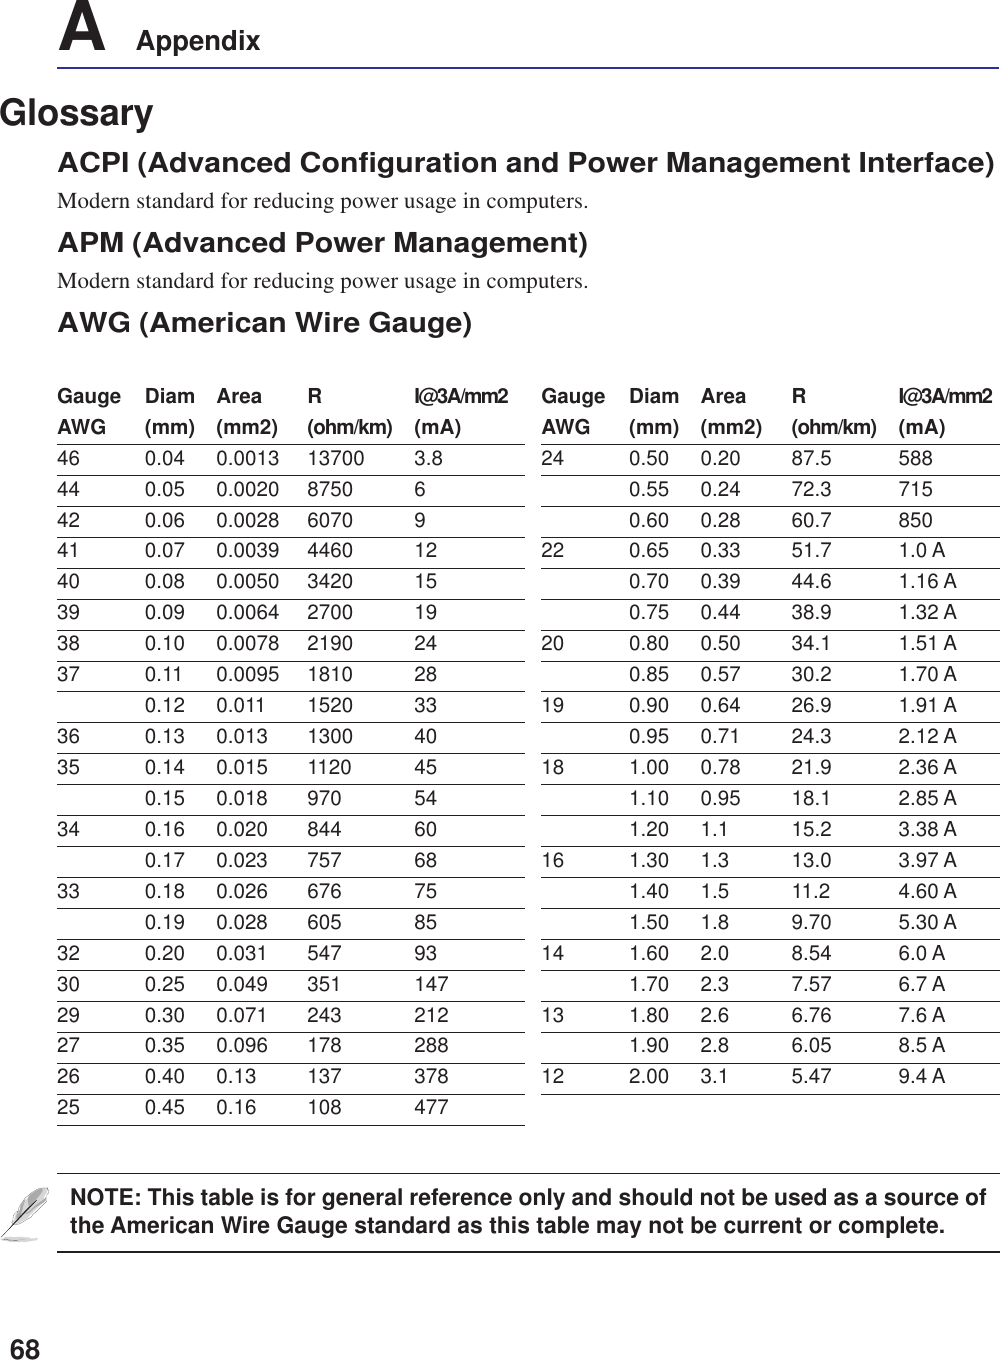 68A    AppendixGlossaryACPI (Advanced Configuration and Power Management Interface)Modern standard for reducing power usage in computers.APM (Advanced Power Management)Modern standard for reducing power usage in computers.AWG (American Wire Gauge)NOTE: This table is for general reference only and should not be used as a source ofthe American Wire Gauge standard as this table may not be current or complete.Gauge Diam Area R I@3A/mm2AWG (mm) (mm2) (ohm/km) (mA)46 0.04 0.0013 13700 3.844 0.05 0.0020 8750 642 0.06 0.0028 6070 941 0.07 0.0039 4460 1240 0.08 0.0050 3420 1539 0.09 0.0064 2700 1938 0.10 0.0078 2190 2437 0.11 0.0095 1810 280.12 0.011 1520 3336 0.13 0.013 1300 4035 0.14 0.015 1120 450.15 0.018 970 5434 0.16 0.020 844 600.17 0.023 757 6833 0.18 0.026 676 750.19 0.028 605 8532 0.20 0.031 547 9330 0.25 0.049 351 14729 0.30 0.071 243 21227 0.35 0.096 178 28826 0.40 0.13 137 37825 0.45 0.16 108 477Gauge Diam Area R I@3A/mm2AWG (mm) (mm2) (ohm/km) (mA)24 0.50 0.20 87.5 5880.55 0.24 72.3 7150.60 0.28 60.7 85022 0.65 0.33 51.7 1.0 A0.70 0.39 44.6 1.16 A0.75 0.44 38.9 1.32 A20 0.80 0.50 34.1 1.51 A0.85 0.57 30.2 1.70 A19 0.90 0.64 26.9 1.91 A0.95 0.71 24.3 2.12 A18 1.00 0.78 21.9 2.36 A1.10 0.95 18.1 2.85 A1.20 1.1 15.2 3.38 A16 1.30 1.3 13.0 3.97 A1.40 1.5 11.2 4.60 A1.50 1.8 9.70 5.30 A14 1.60 2.0 8.54 6.0 A1.70 2.3 7.57 6.7 A13 1.80 2.6 6.76 7.6 A1.90 2.8 6.05 8.5 A12 2.00 3.1 5.47 9.4 A